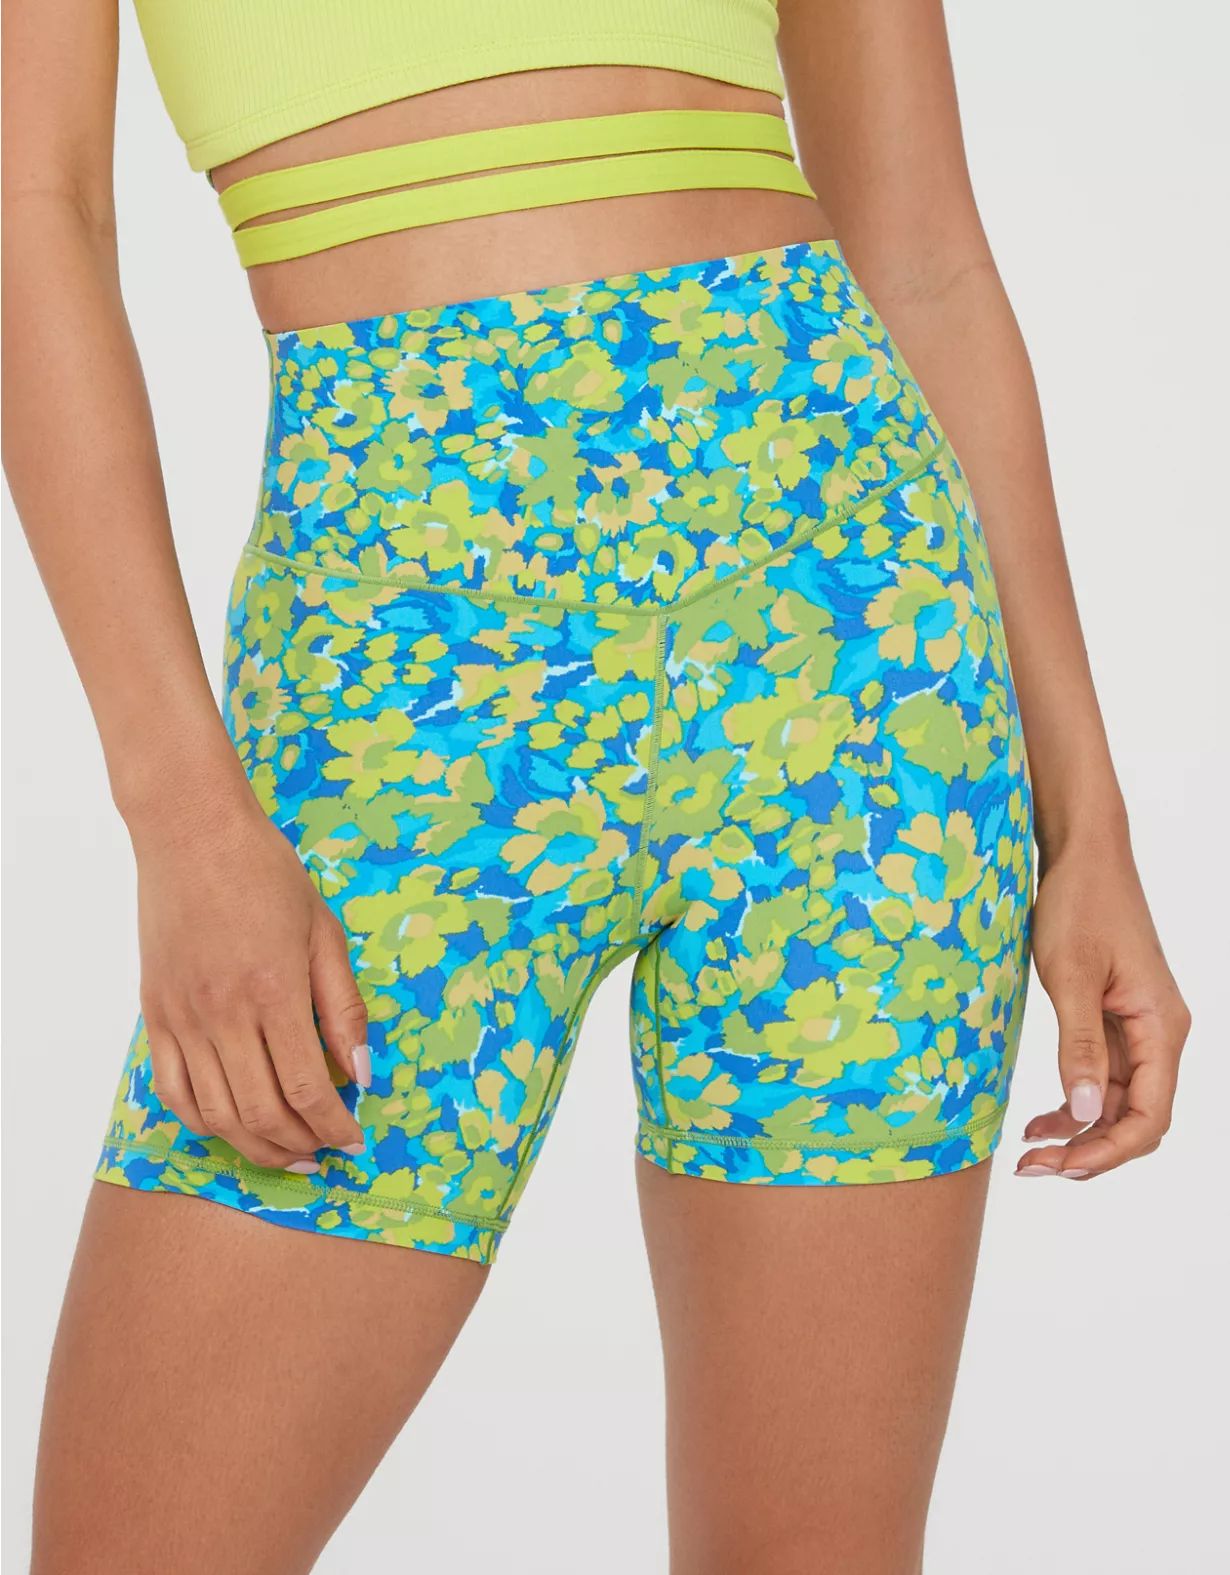 OFFLINE By Aerie Real Me Xtra Hold Up! 5" Bike Short | Aerie